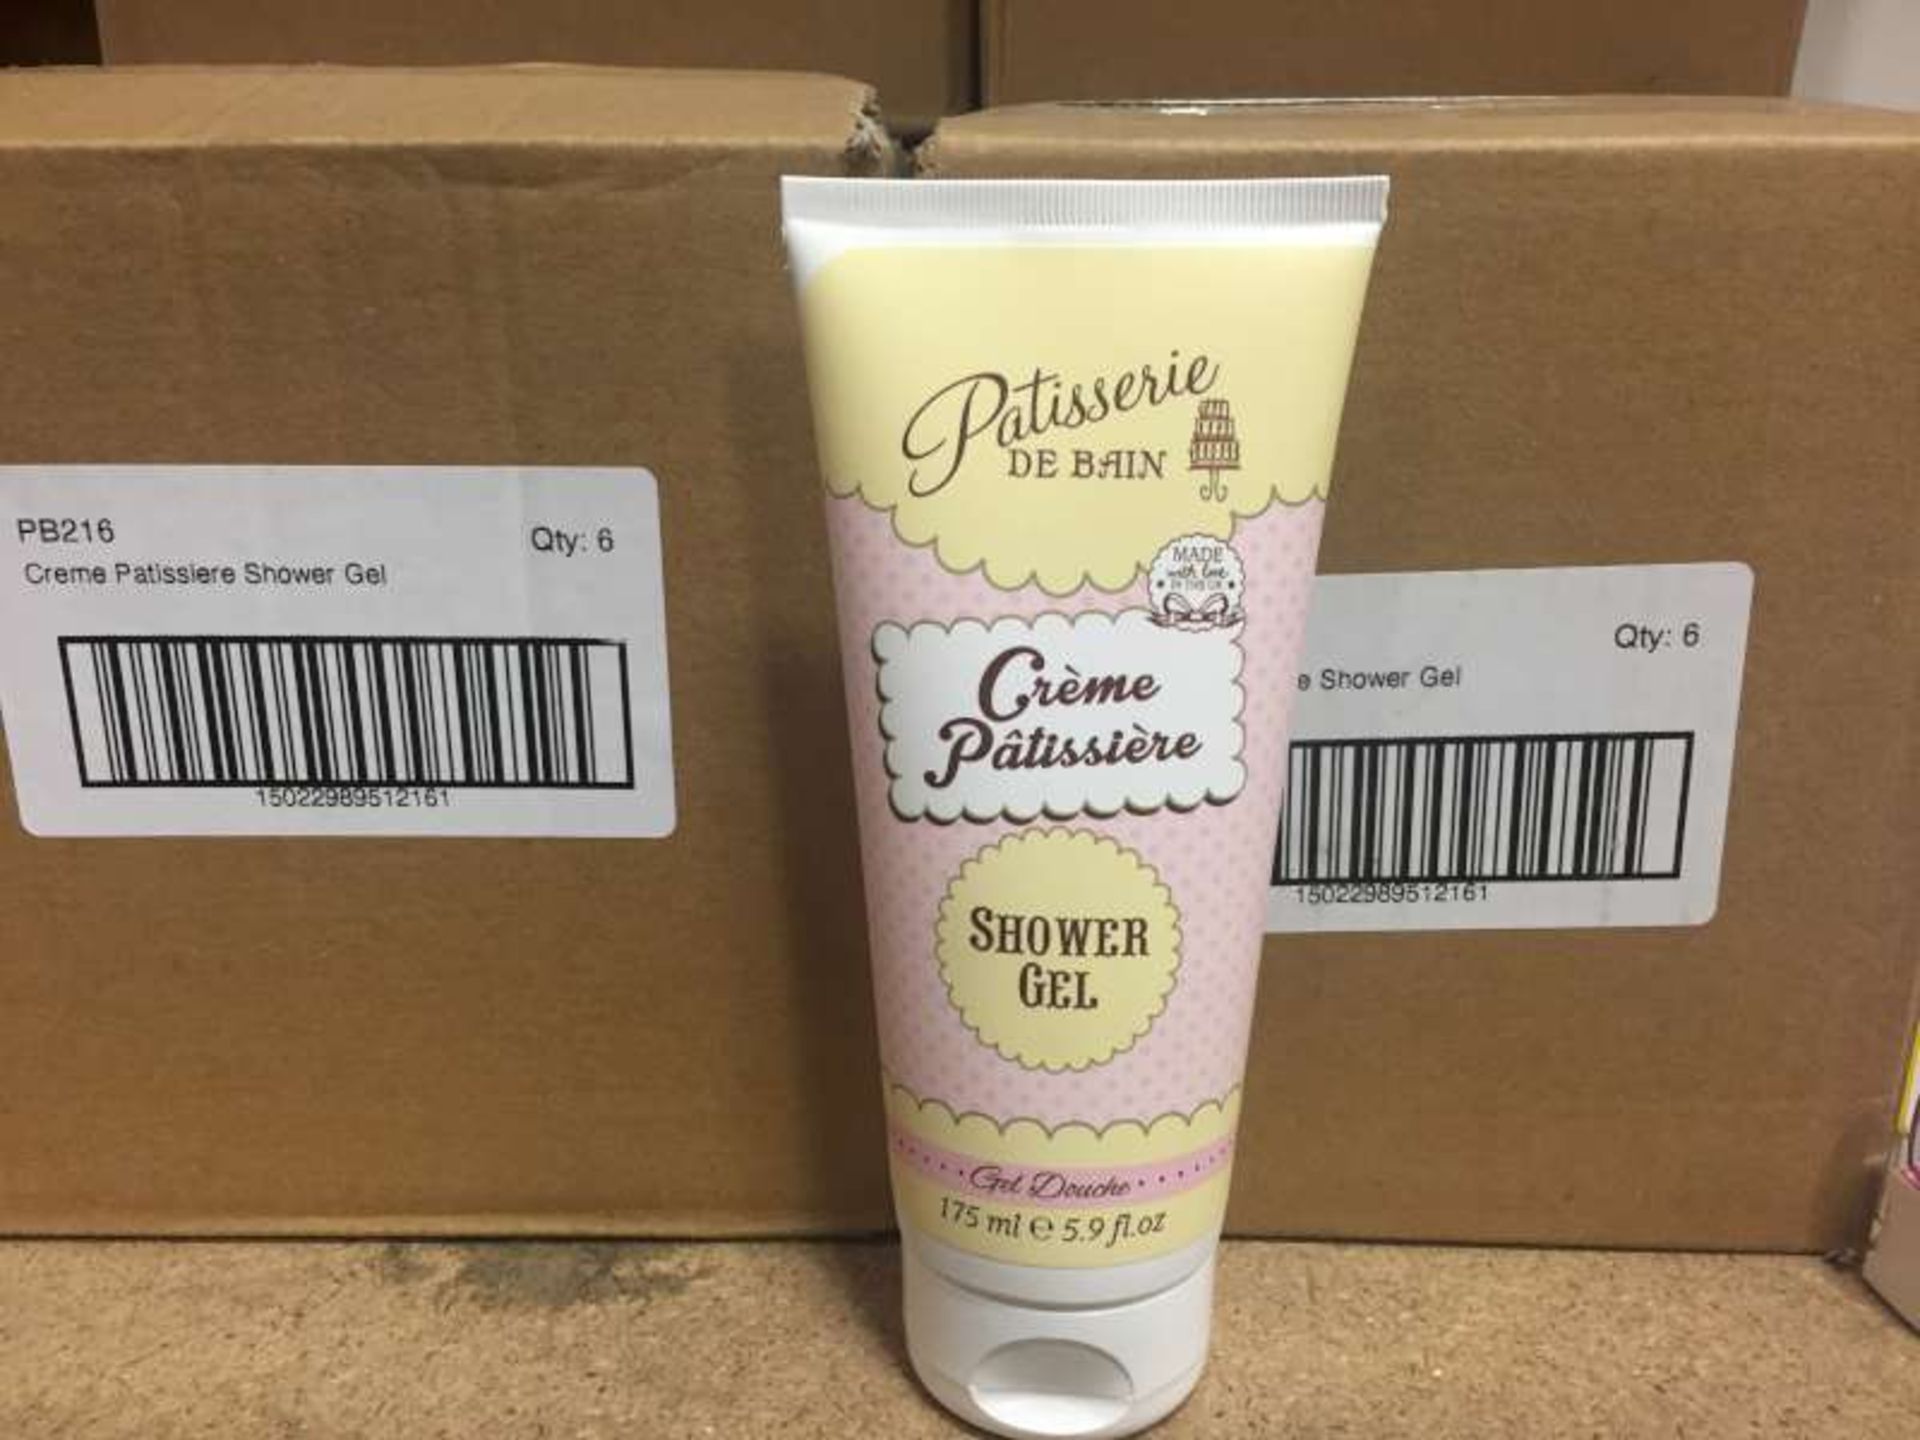 54 X 150 ML TUBES OF CRÈME PATISSIERE SHOWER GEL IN 9 BOXES